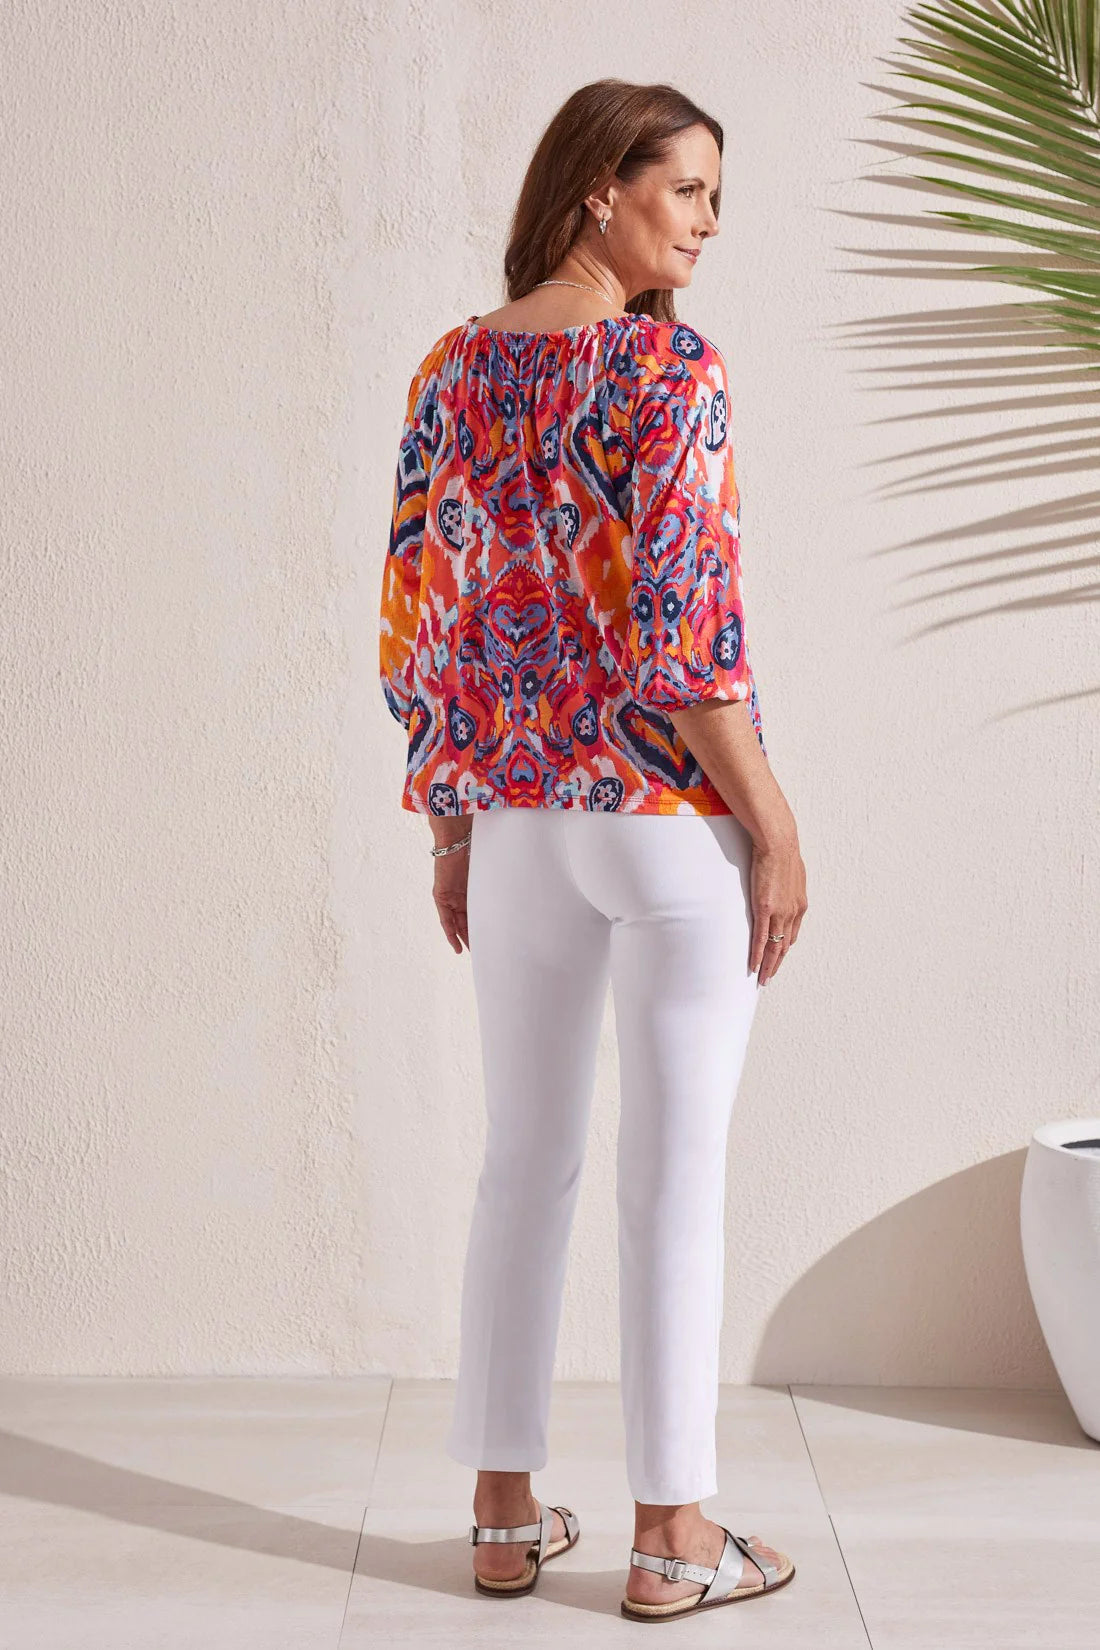 Channel cheerful vibes all day long in this peasant top crafted from printed linen-blend fabric.